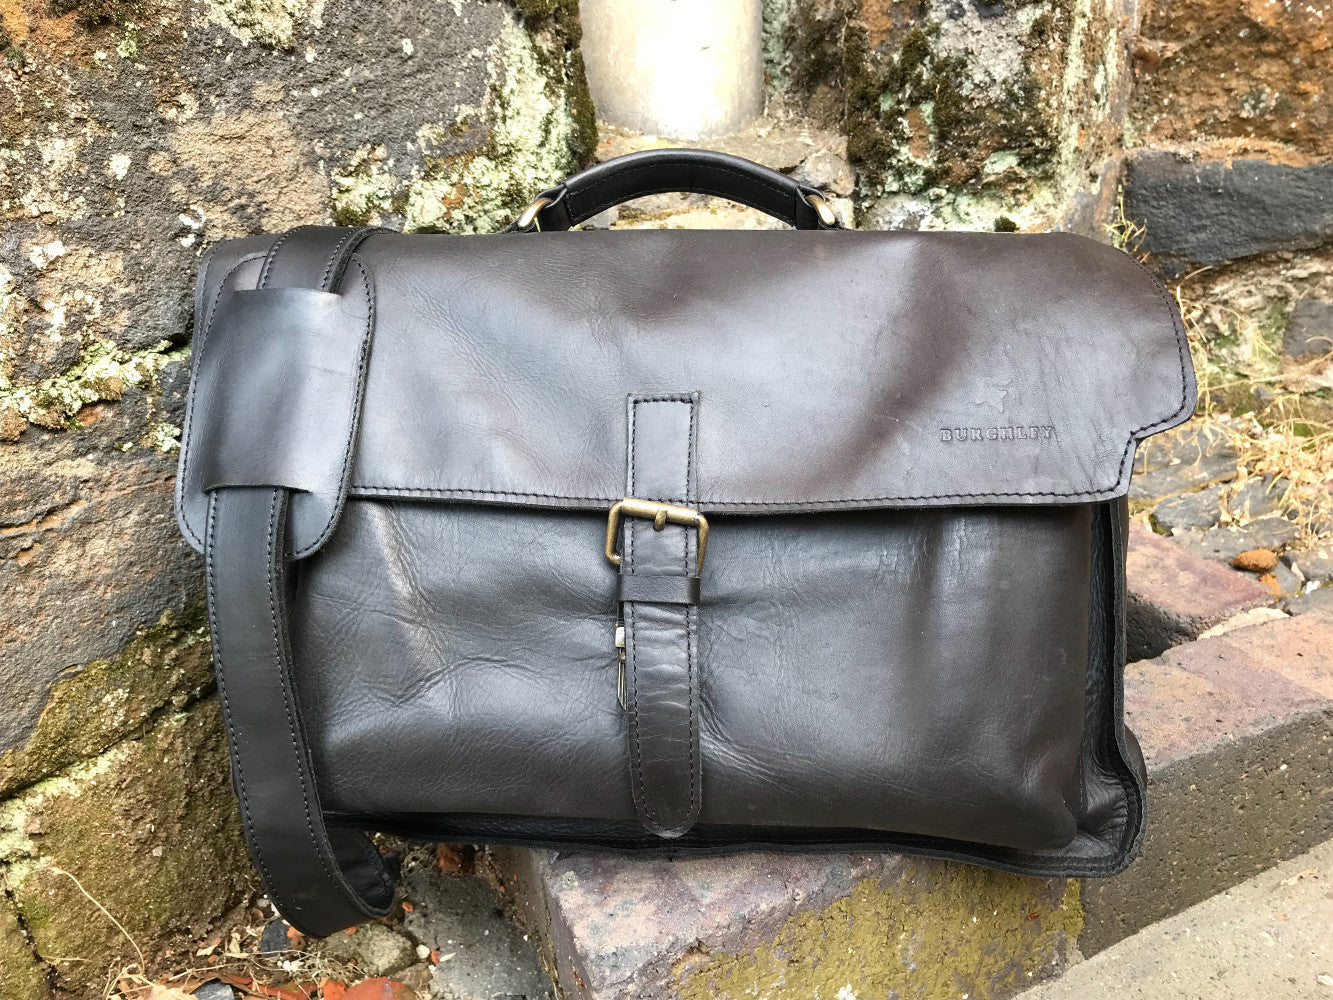 The Dorrington Briefcase. A classic 30's styled leather briefcase by Burghley Bags. A handmade leather vintage work bag, with enough space for 15" laptops. Comes with an adjustable and detachable shoulder strap. Shown in classic dark brown.